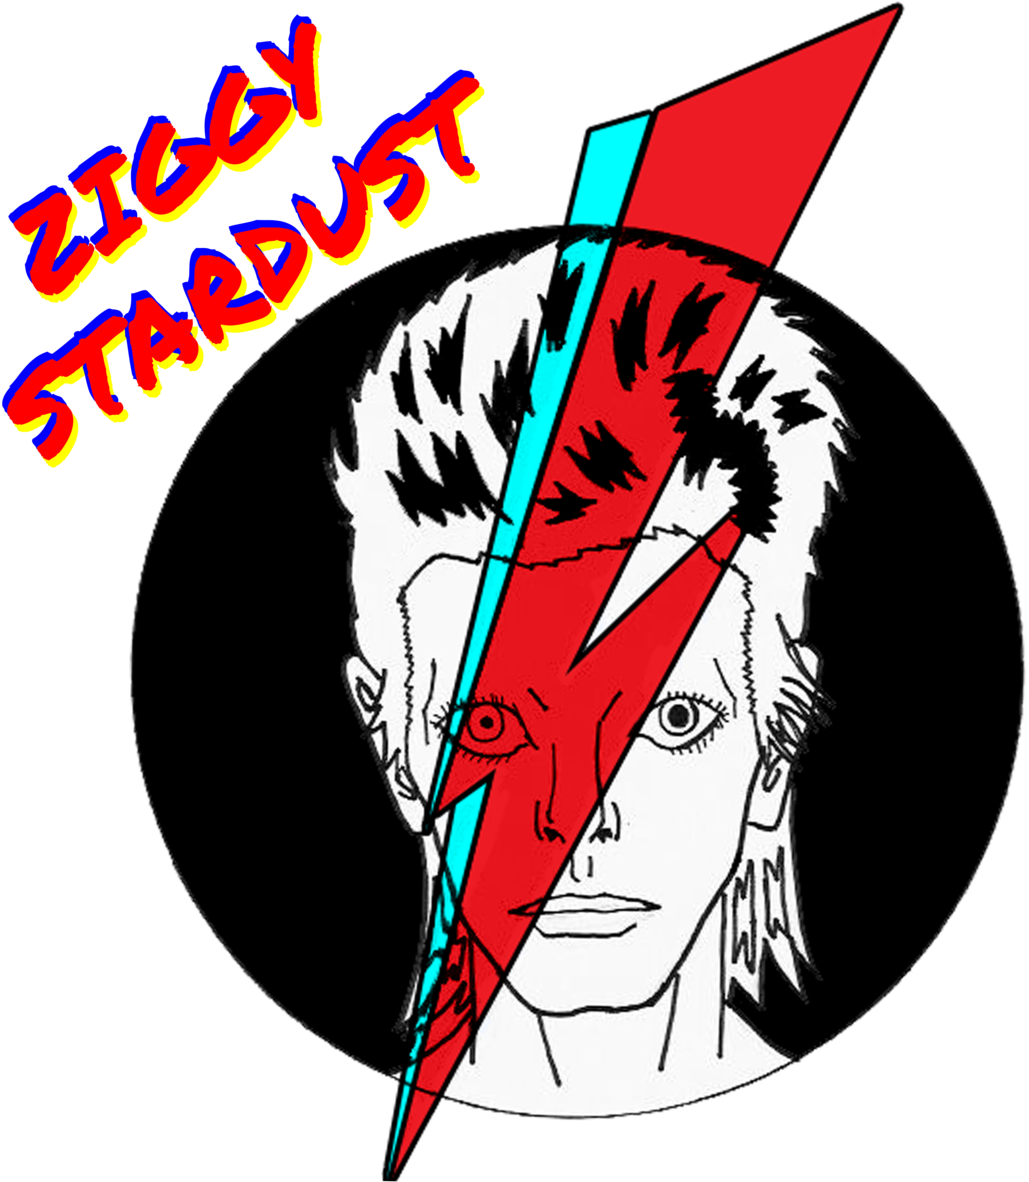 Digital Arts ©2016 By Eidetic Memory - The Rise And Fall Of Ziggy Stardust And The Spiders (1200x1200)